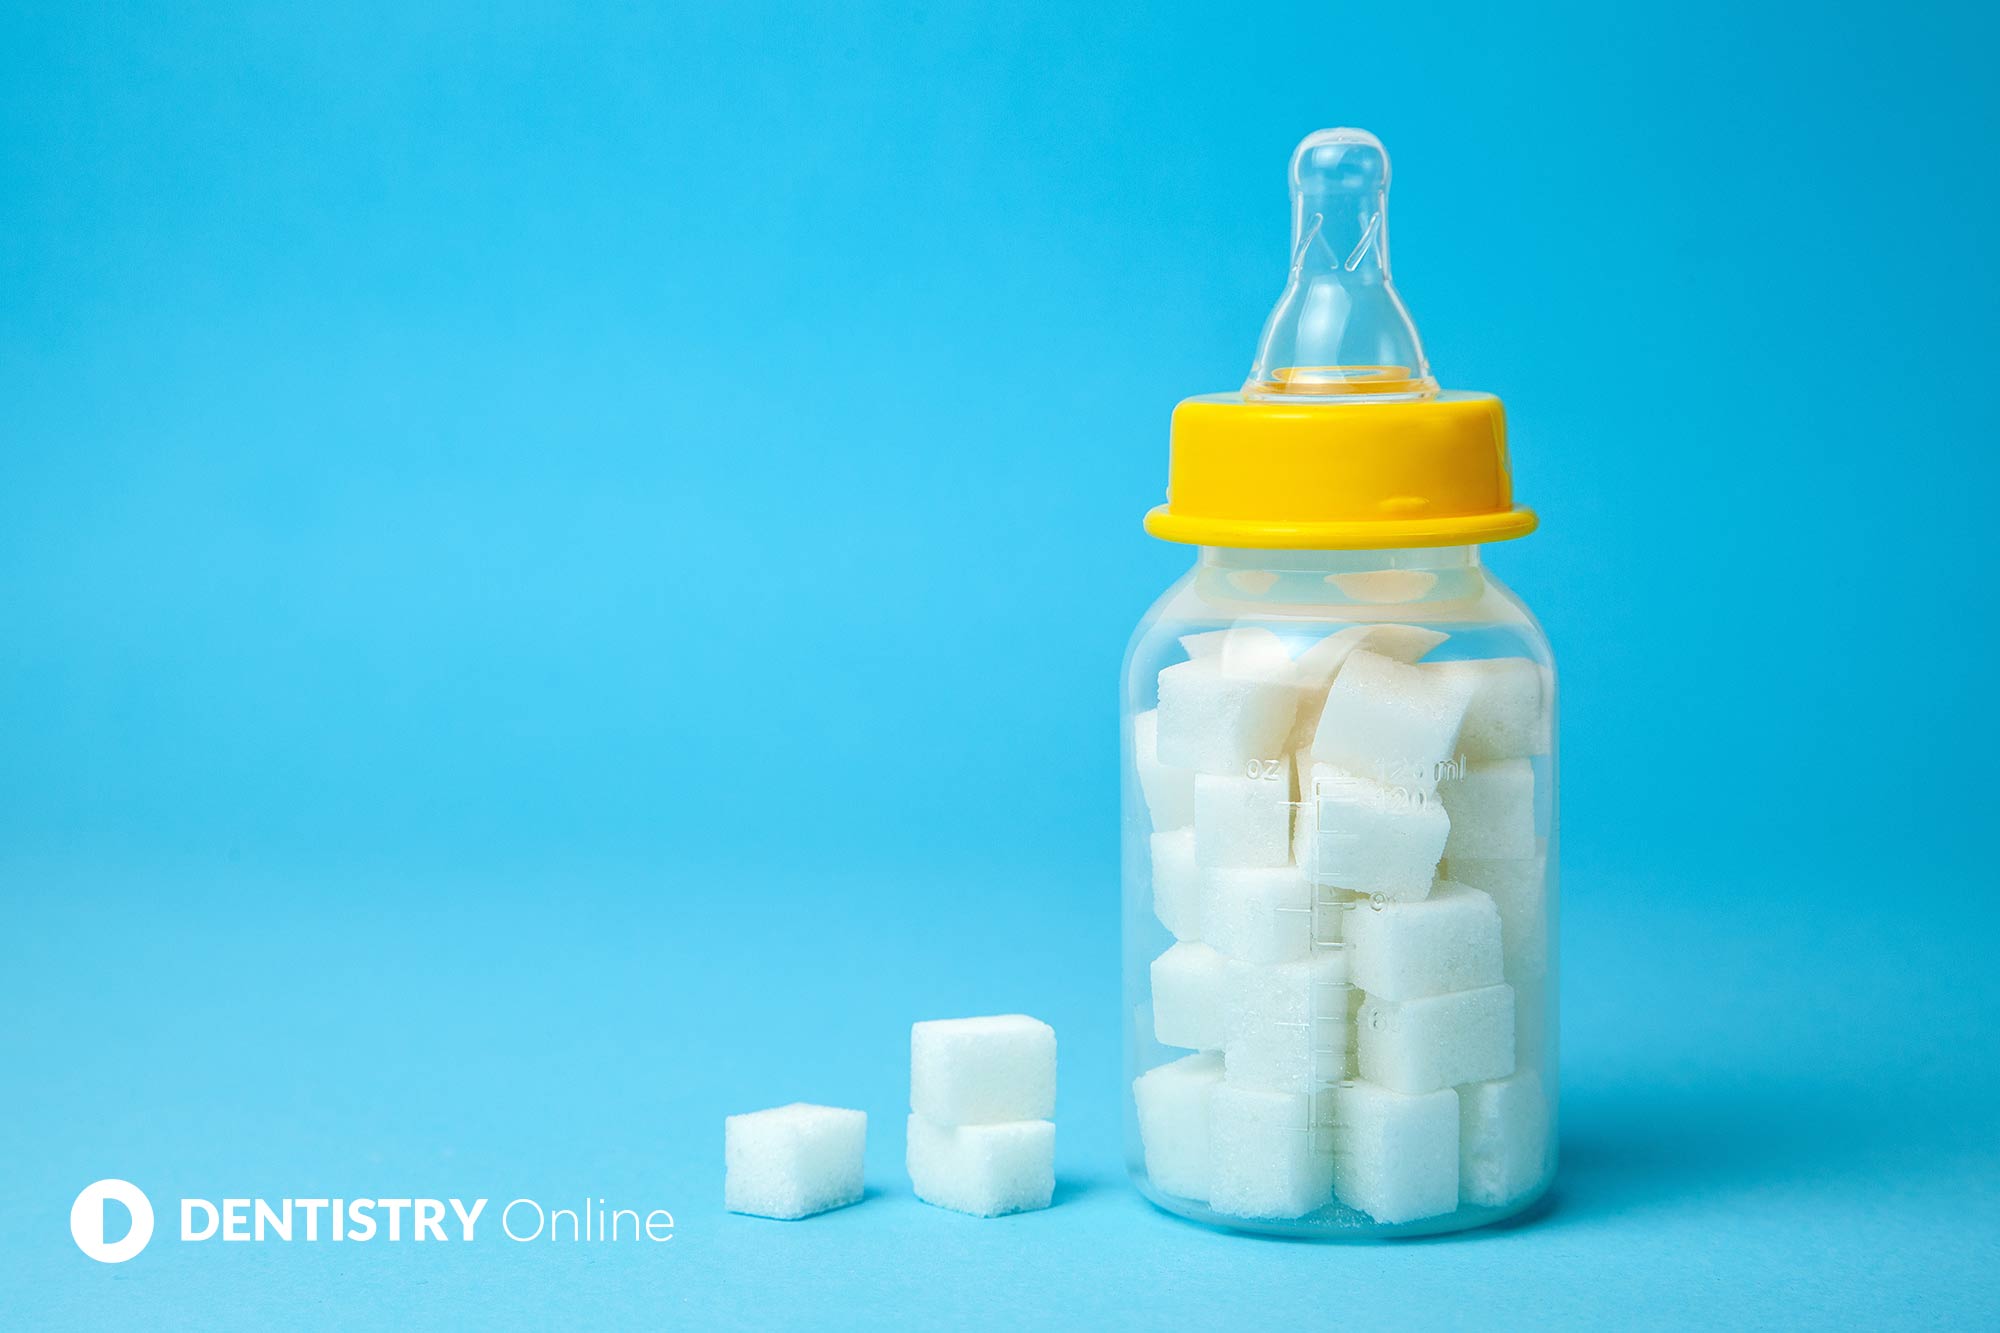 A high sugar diet during the breastfeeding period can delay cognitive development in infants